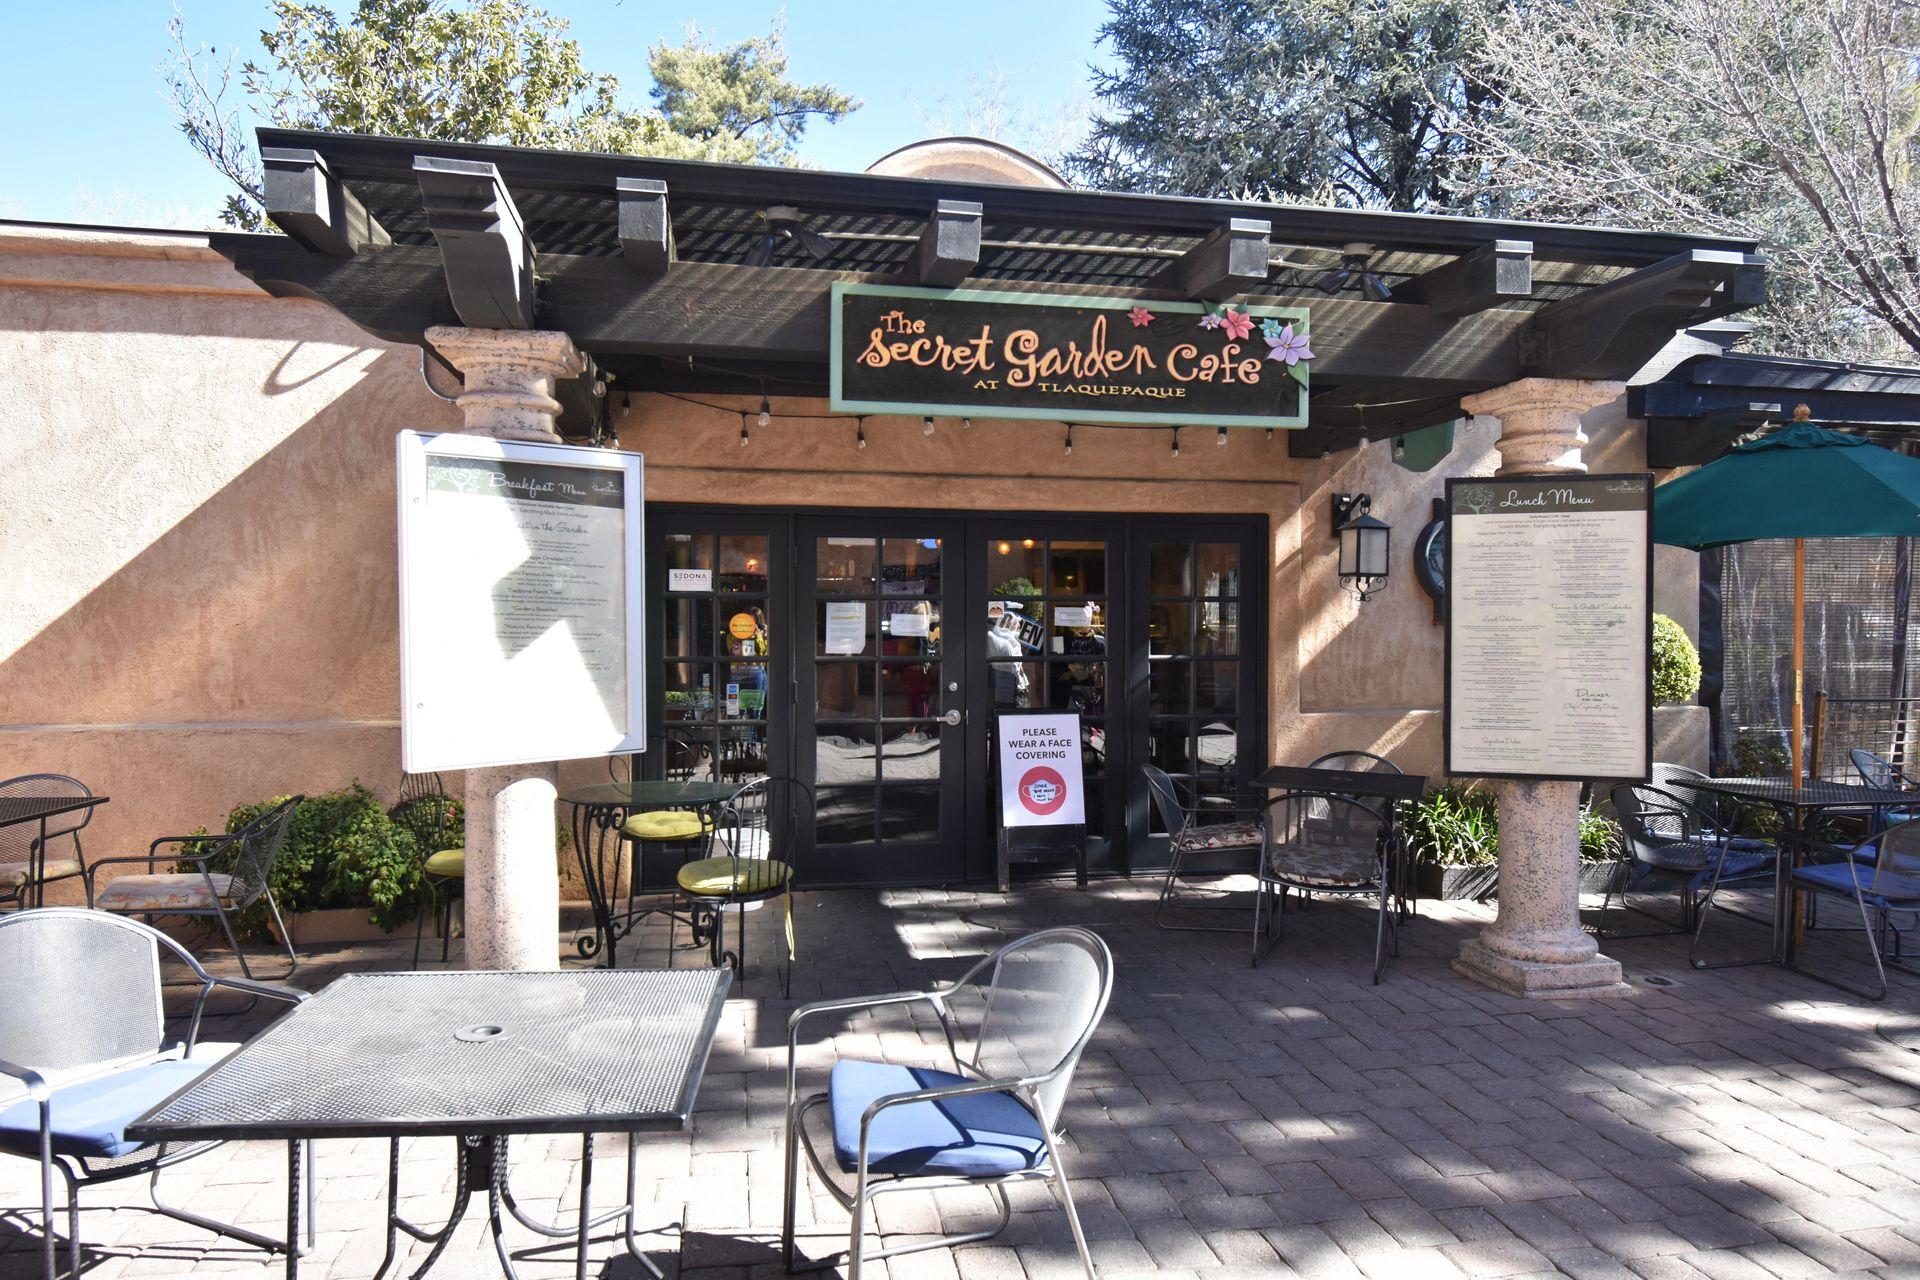 The exterior of The Secret Garden Cafe. There are menus and a table in front of the building.